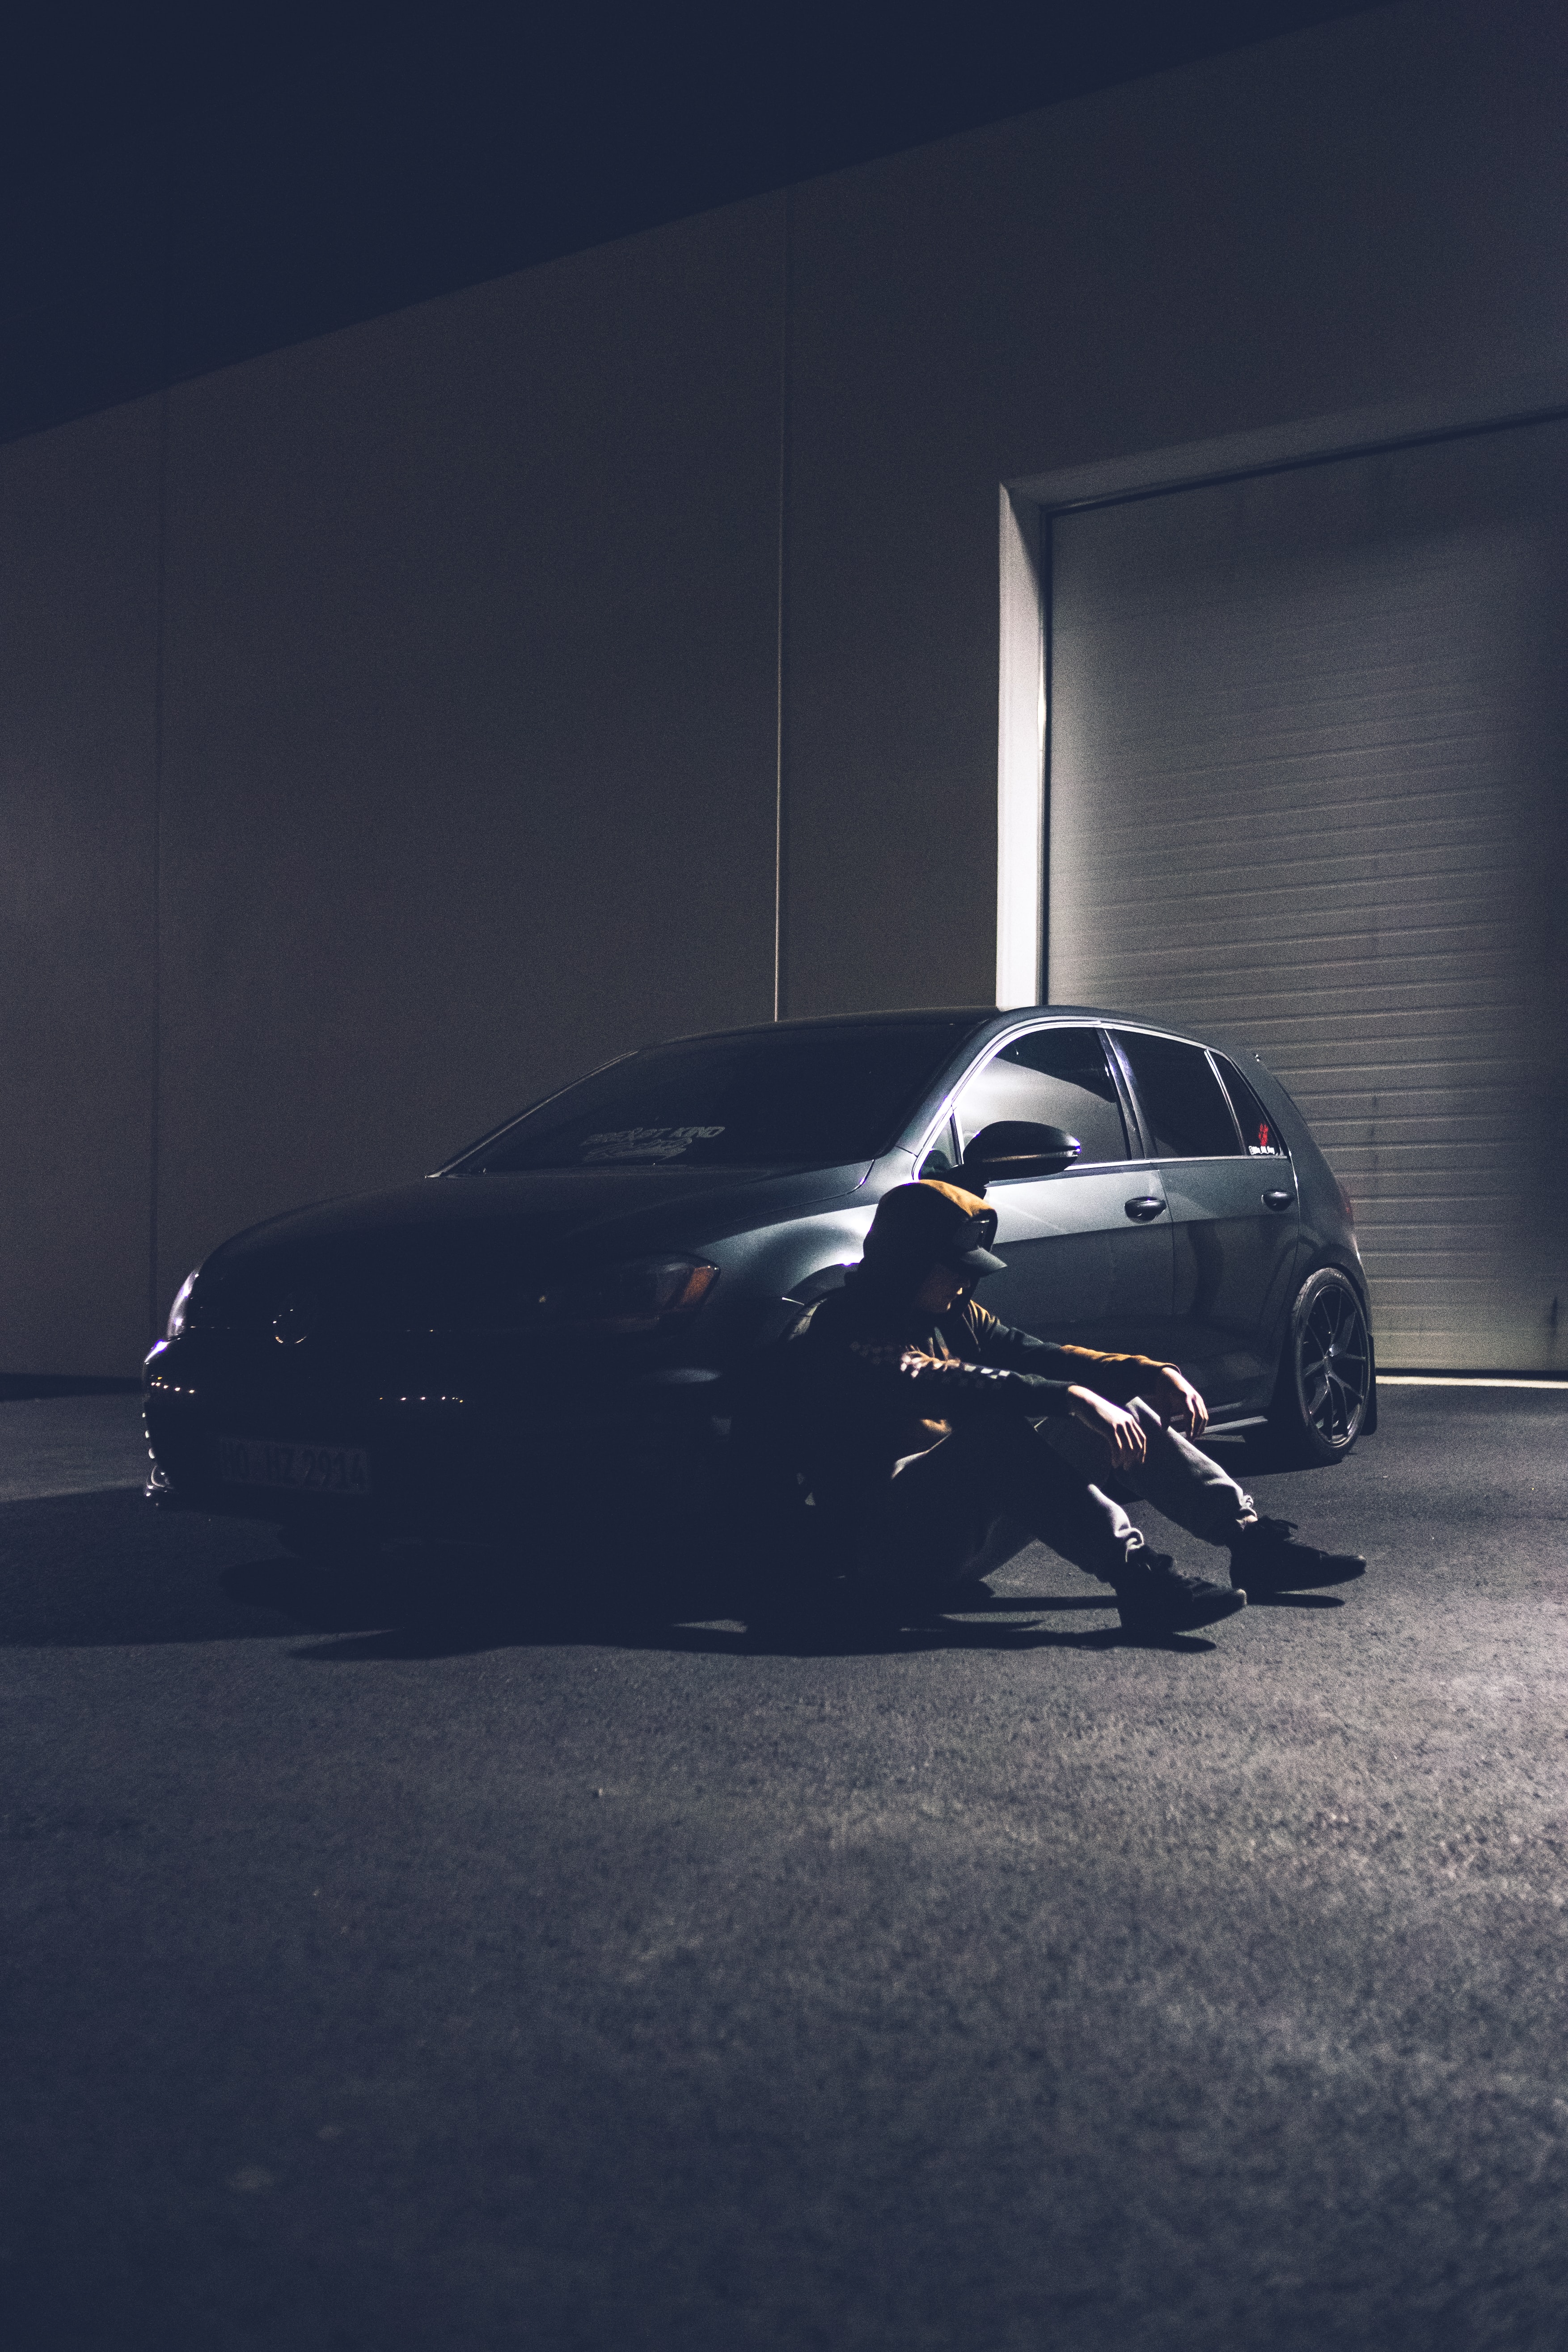 alone, loneliness, sadness, cars, car, machine, cap, lonely, sorrow phone wallpaper